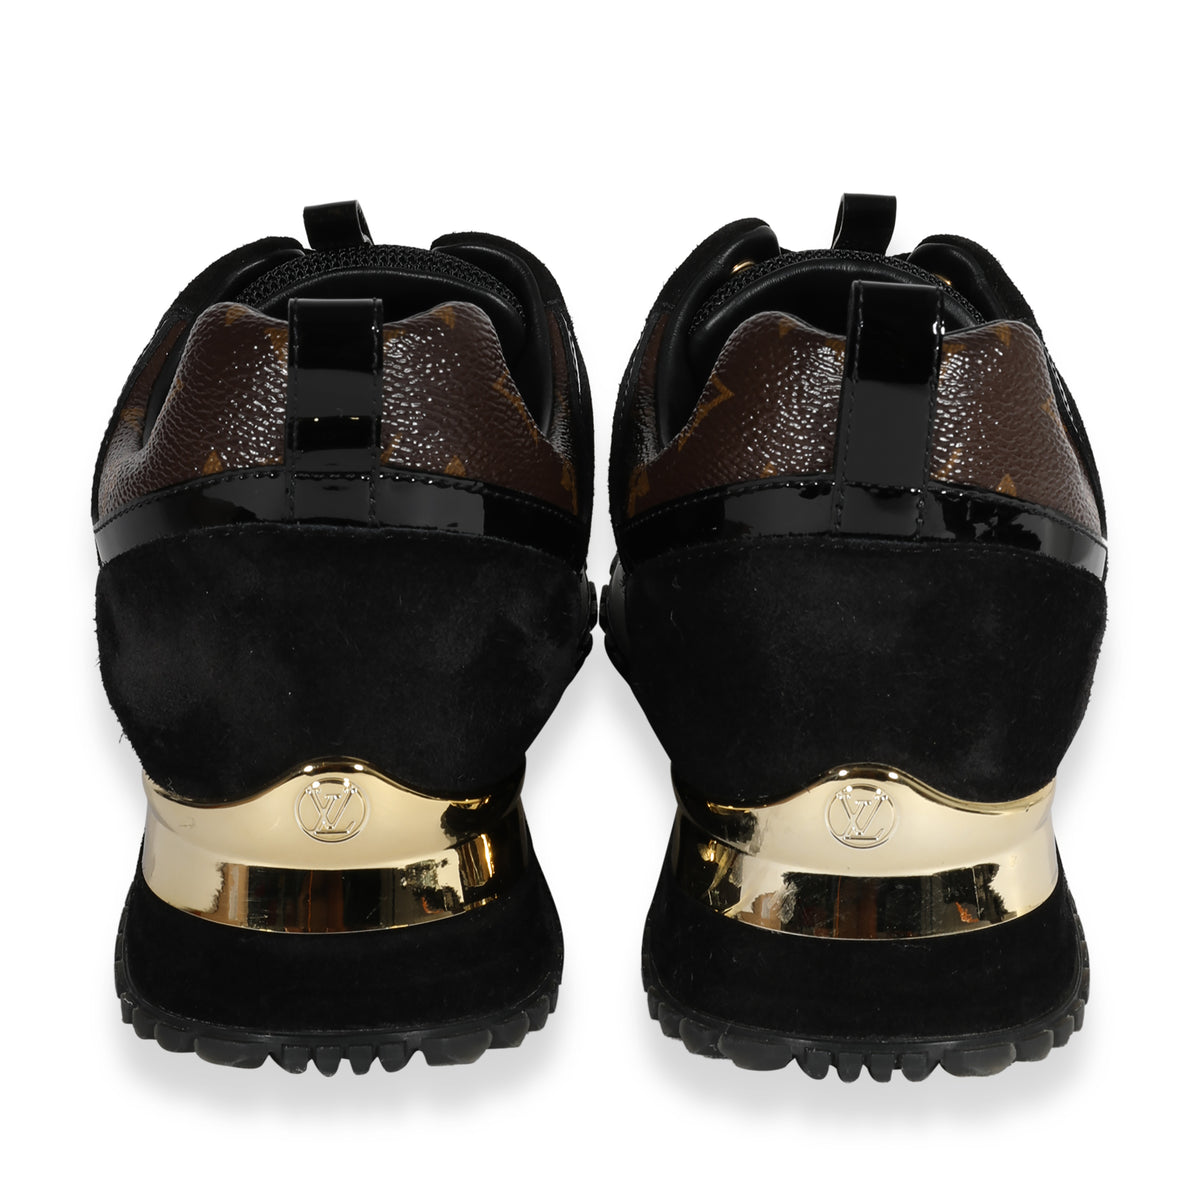 Louis Vuitton Run Away sneakers in black suede and gold patented